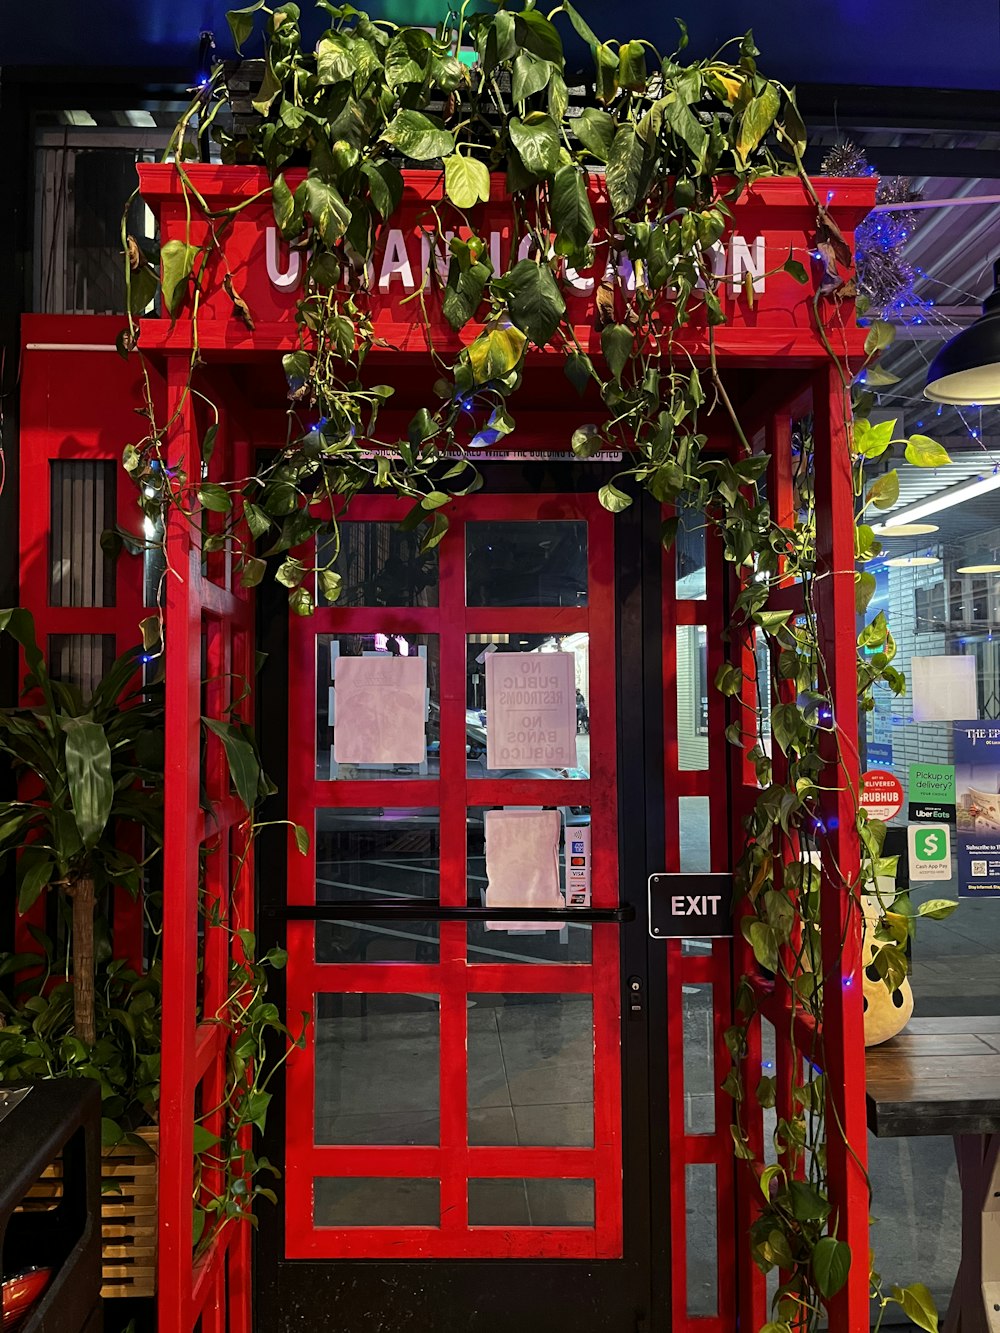 a red phone booth with ivy growing over it